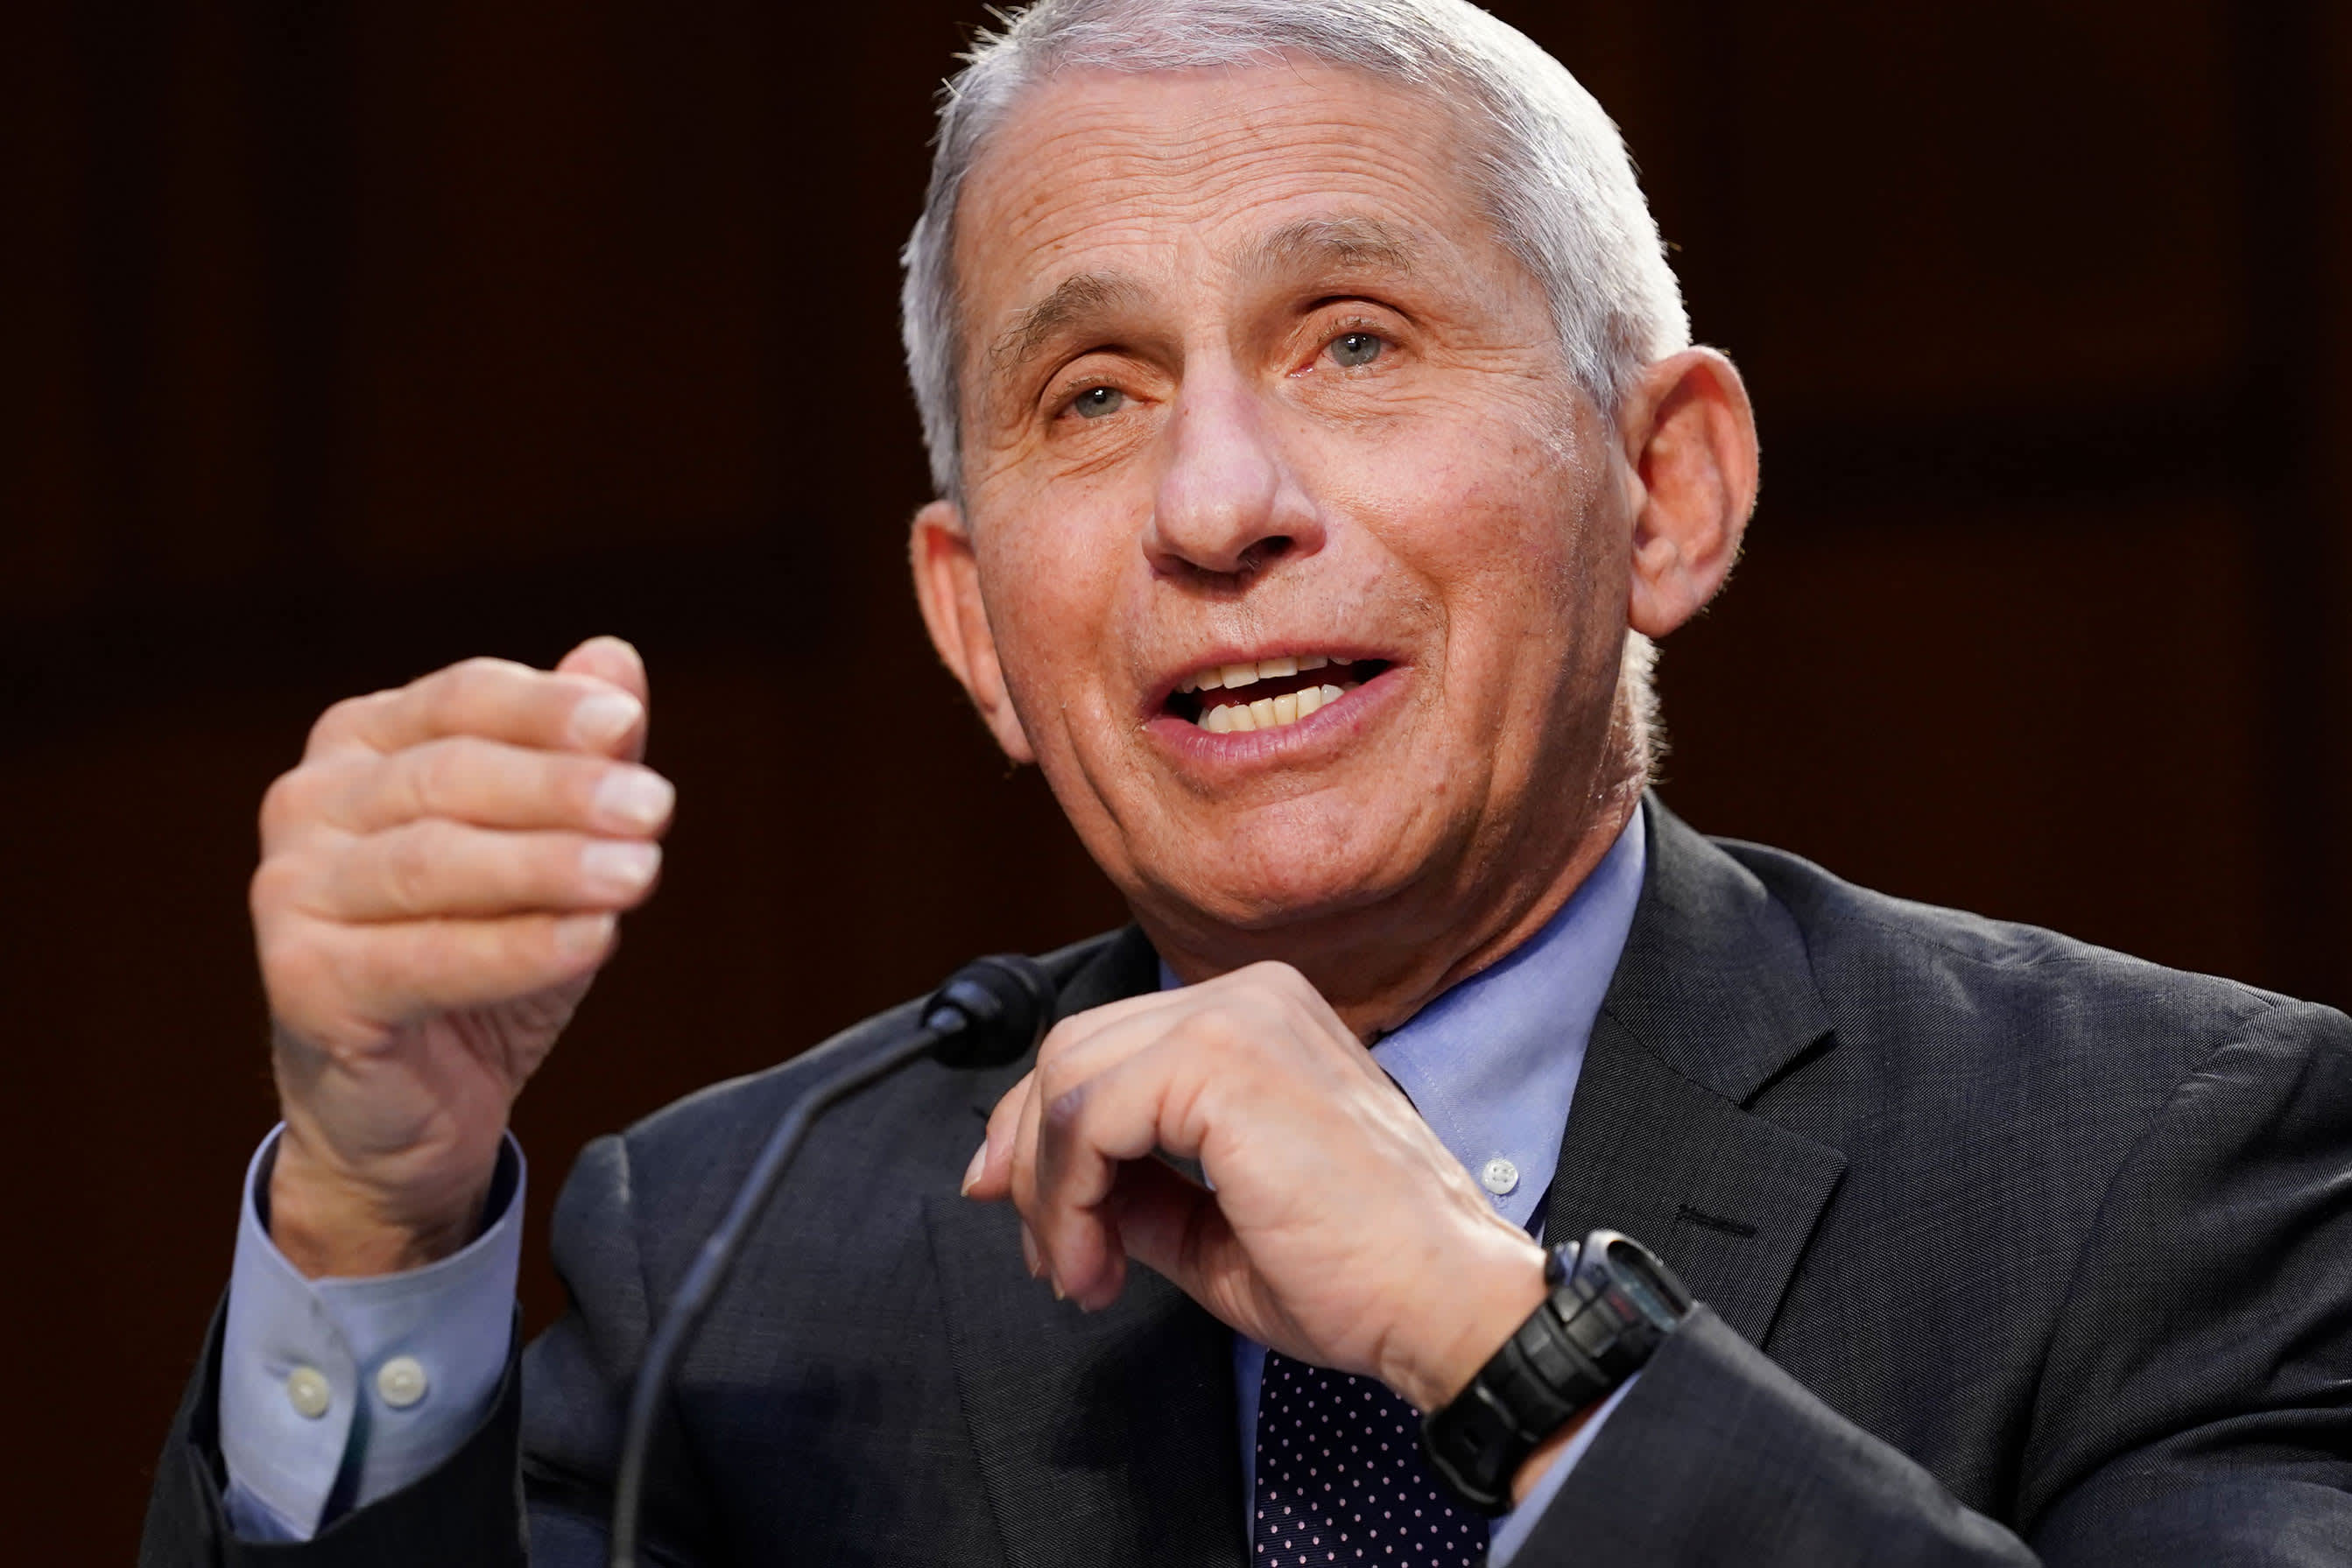 ‘I totally disagree with you,’ Fauci told the Republican senator in an exchange of masks